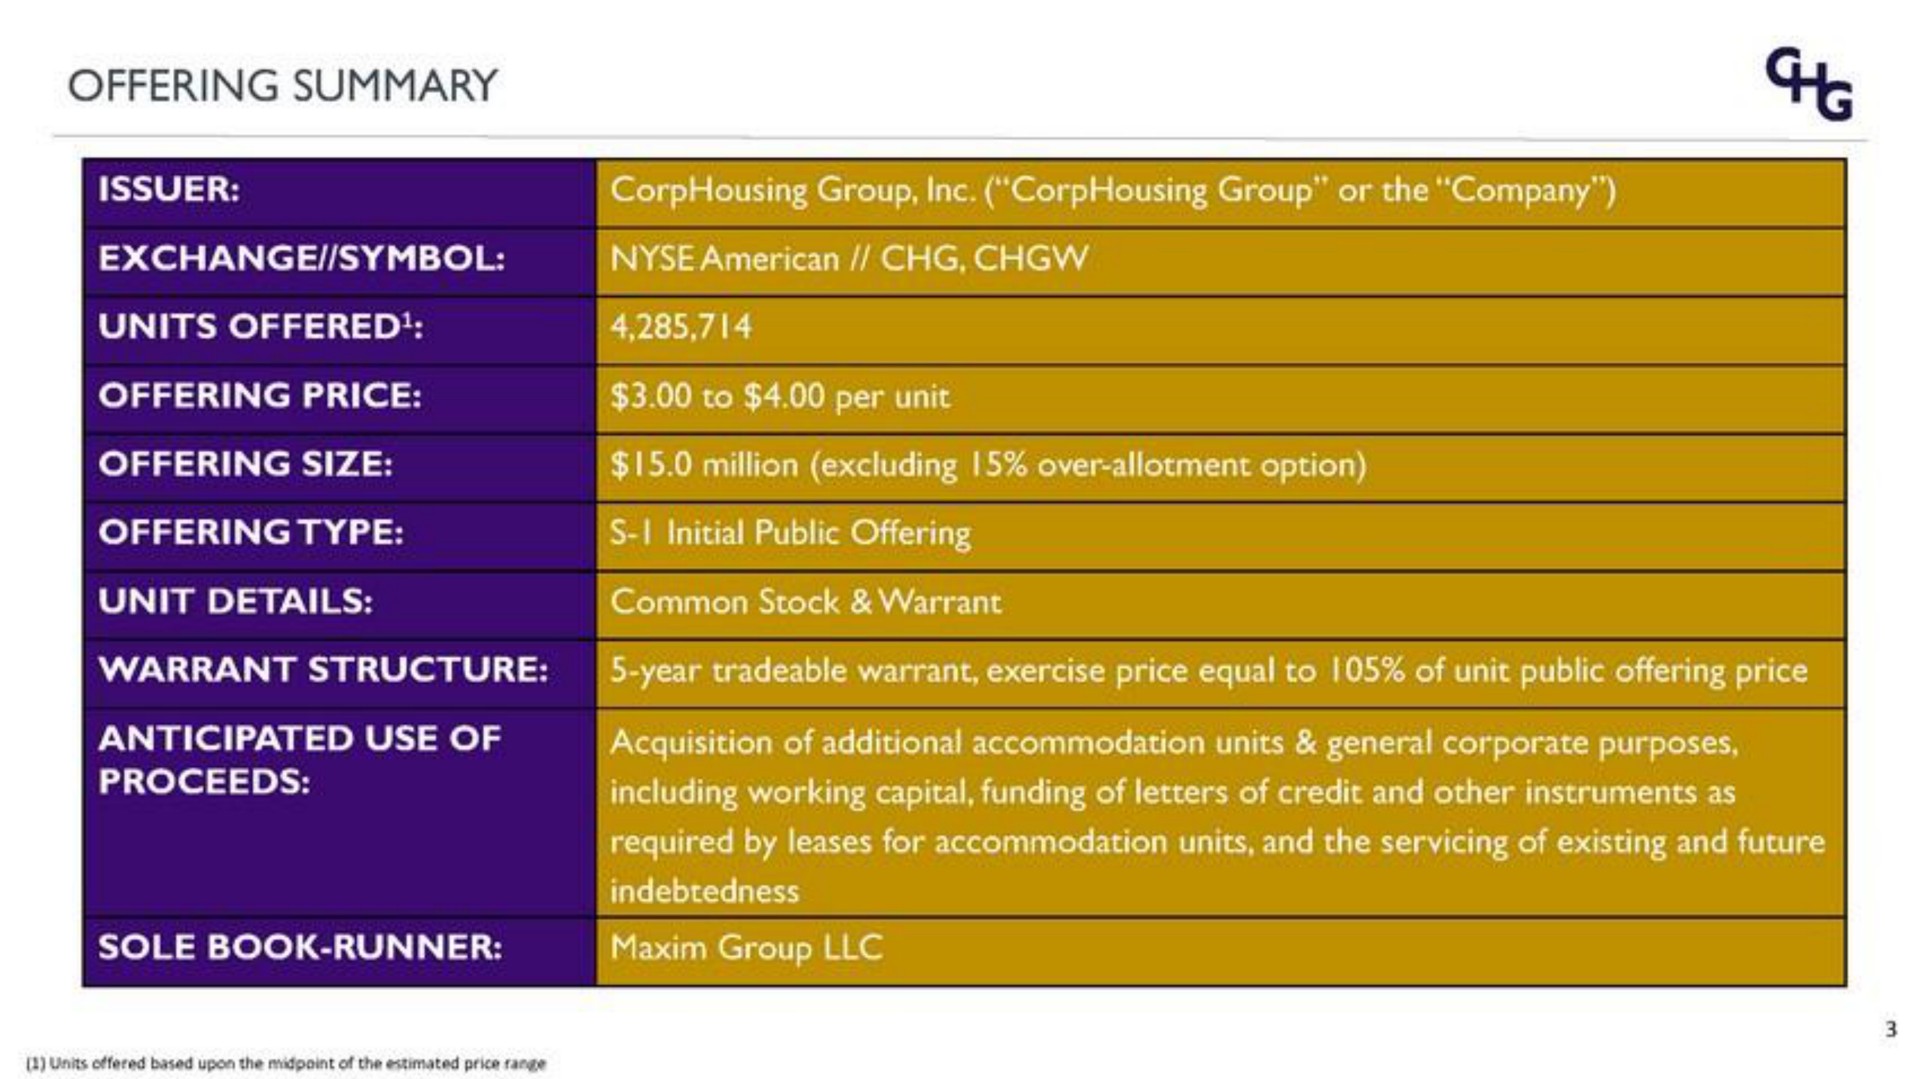 offering summary group group or the company initial public offering year warrant exercise price equal to of unit public offering price maxim group including working capital funding of letters of credit and other instruments as required by leases for accommodation units and the servicing of existing and future | Corphousing Group